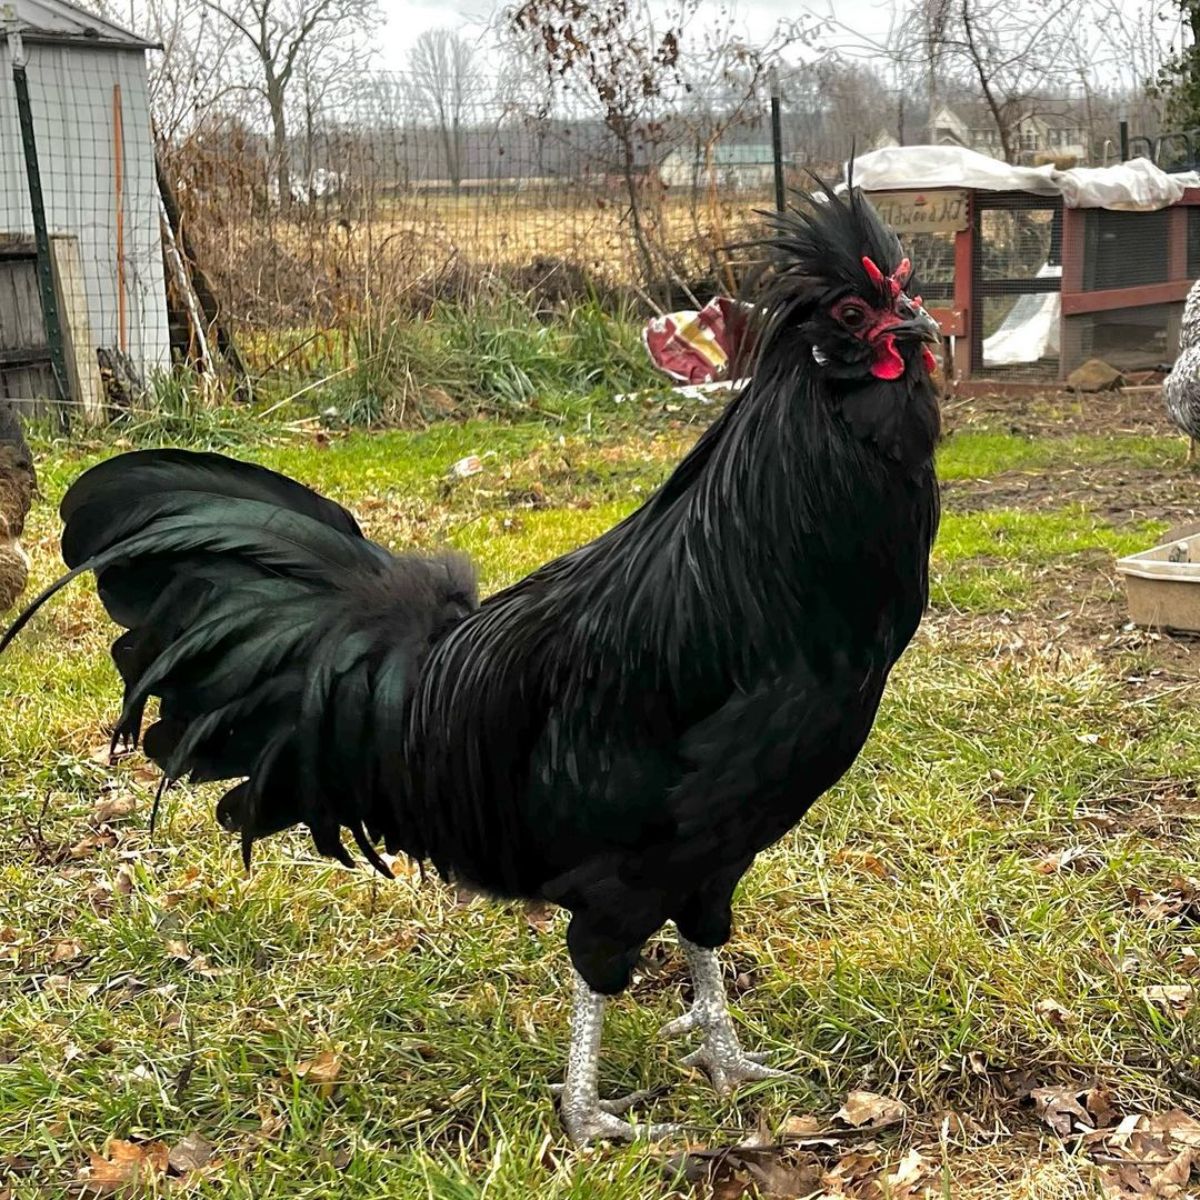 A beautiful black Crevecoeur rooster in a backyard.